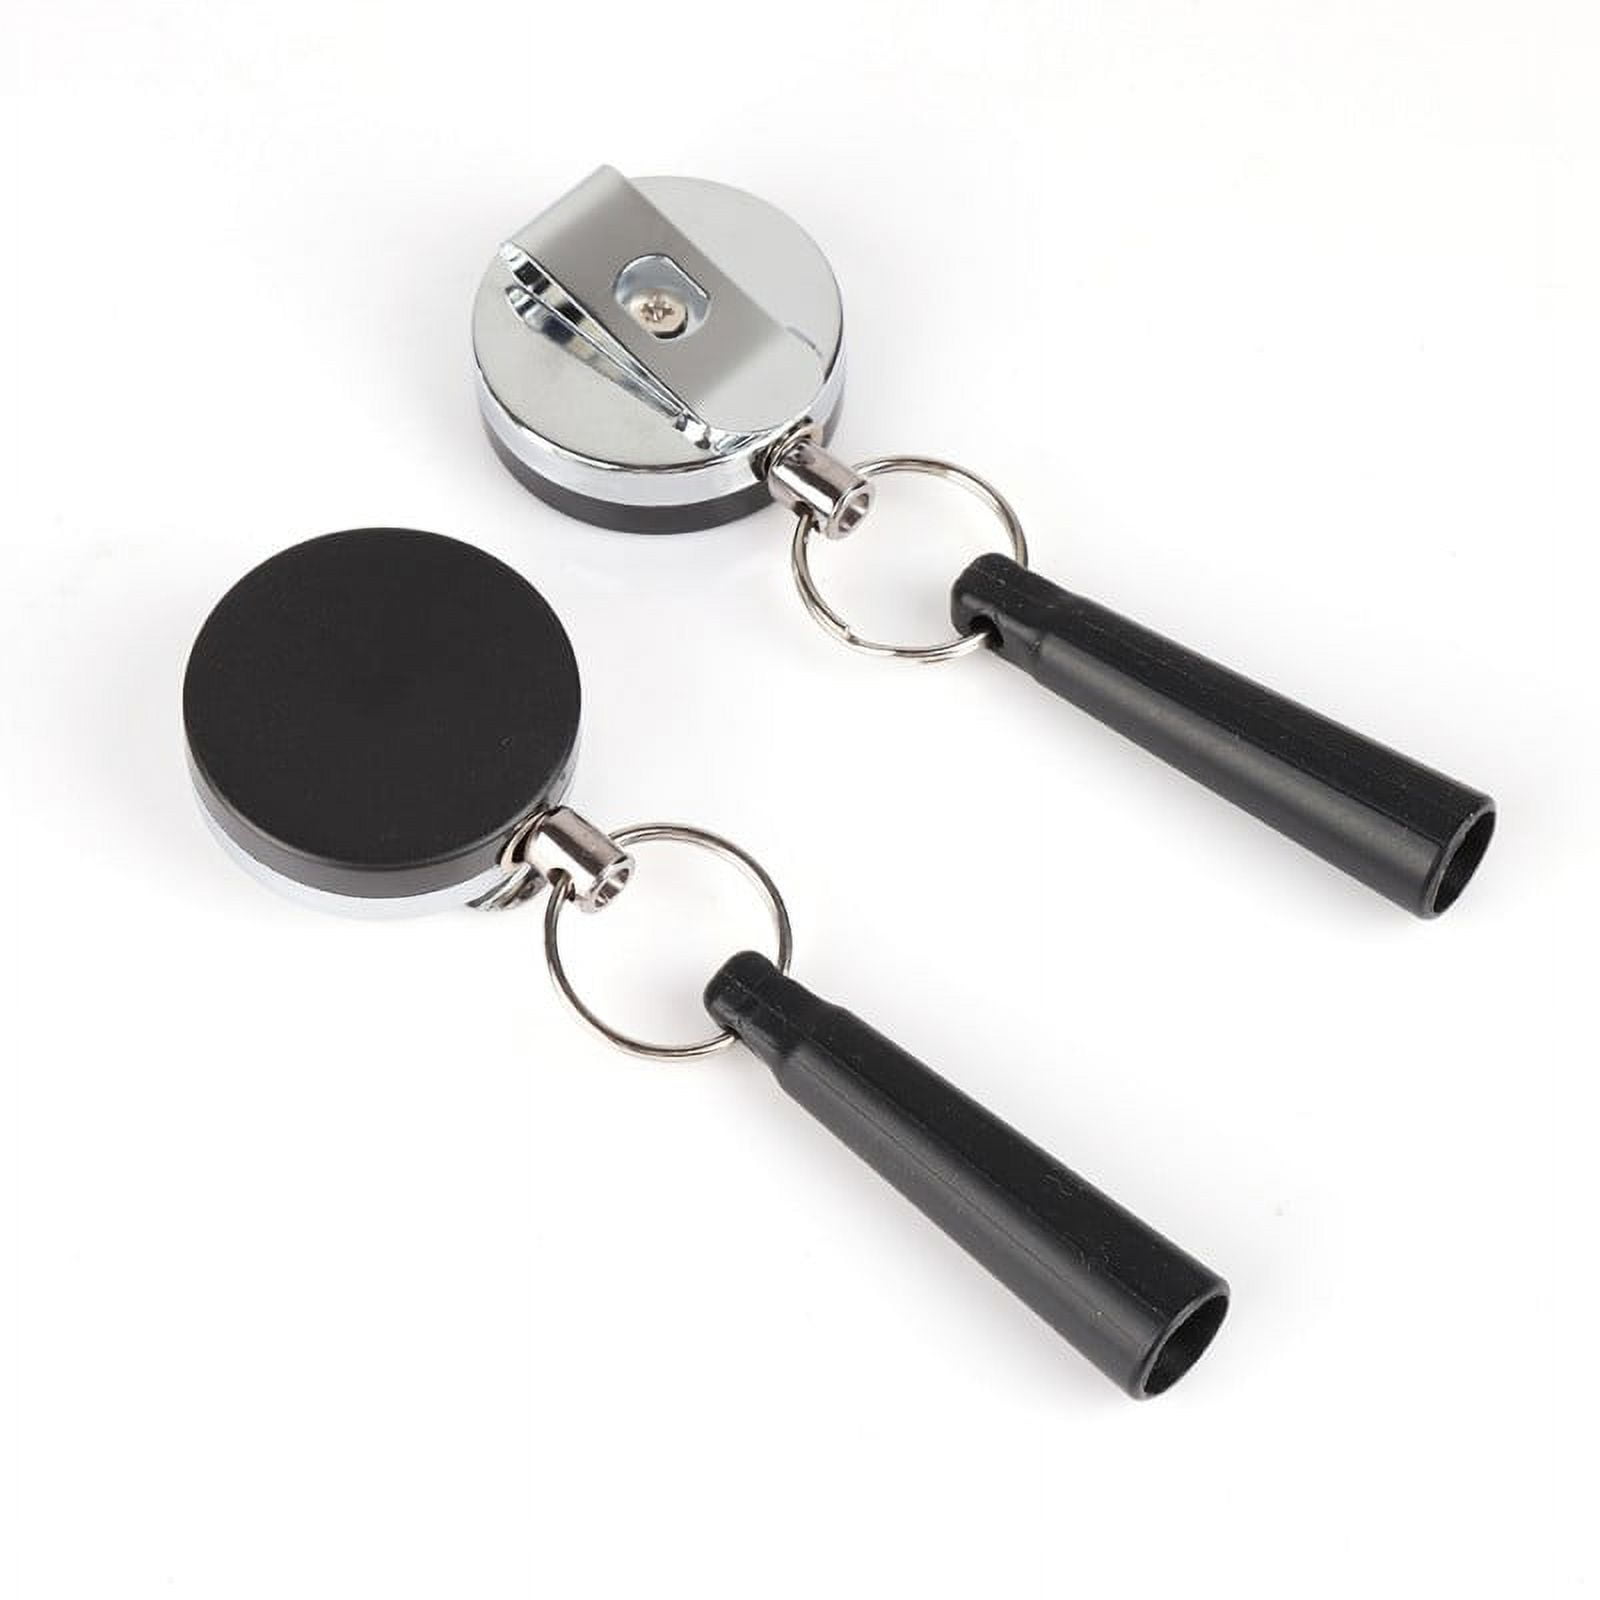 Sonbest Anti Lost Rope Key Ring with Pen Pencil Holder Key Chain Recoil  Sporty Retractable Alarm Key Ring Yoyo Ski Pass ID Card Holder 